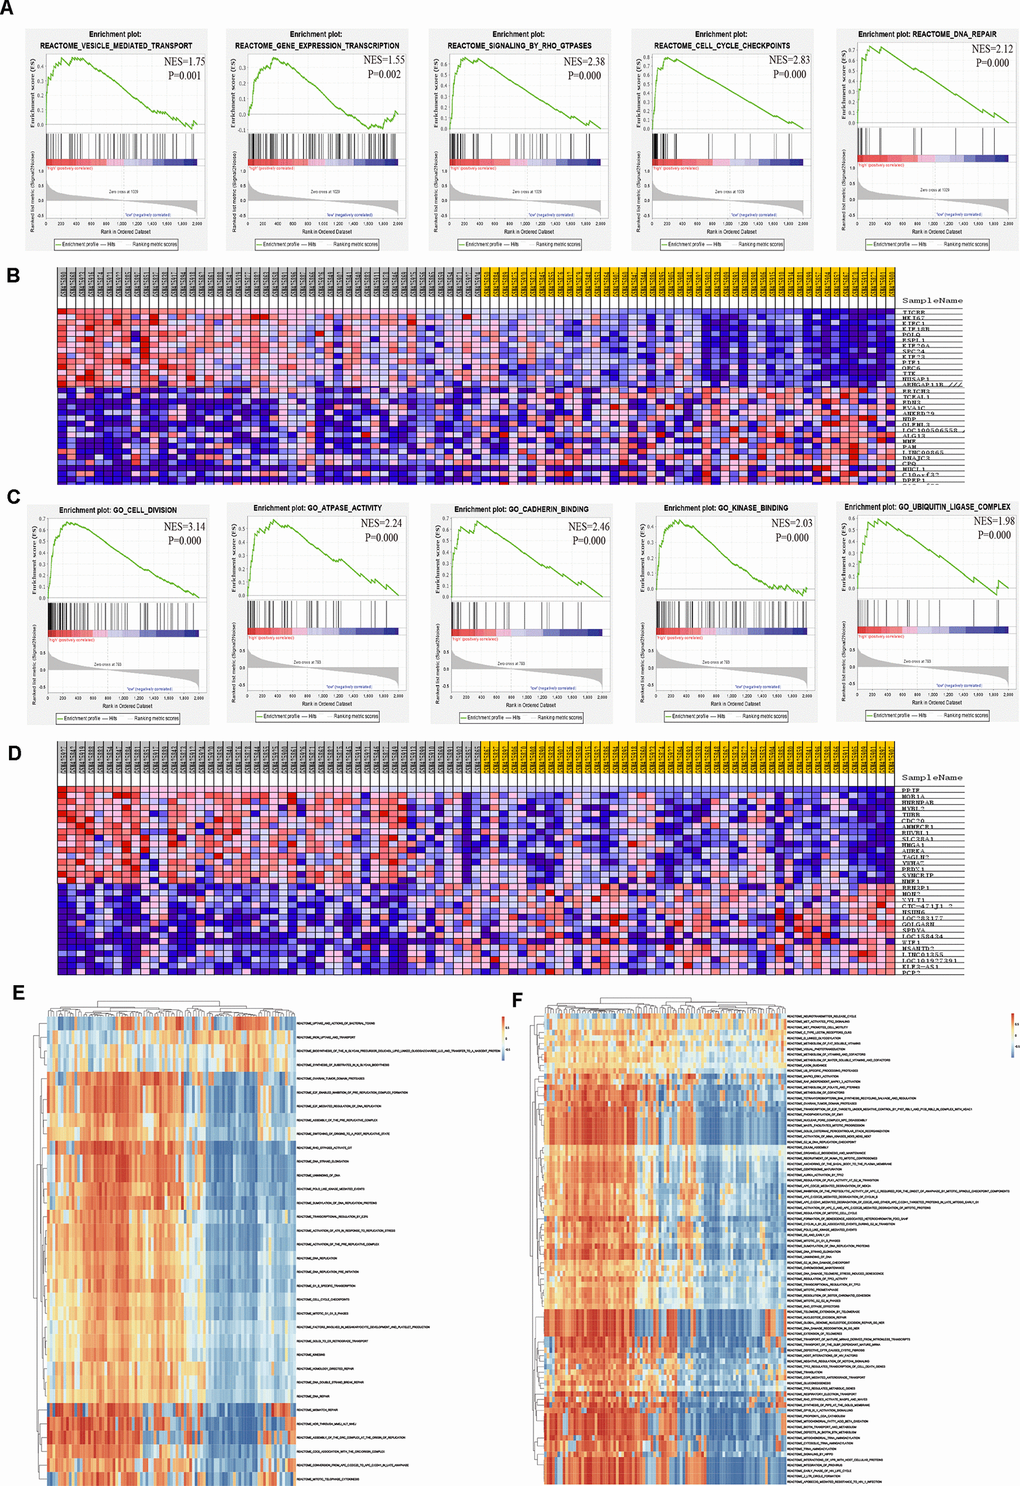 Significant TICRR and PPIF-related genes and pathways in EC obtained by GSEA and GSVA. (A) The most involved pathways in high-expression group of TICRR obtained by GSEA analysis. (B) Transcriptional expression profiles of the significant genes were shown in a heat map. (C) The most common functional gene sets in high-expression group of PPIF by GSEA. (D) Transcriptional expression profiles of the significant genes related with PPIF were shown in a heat map. (E, F) GSVA-derived clustering heatmaps of differential pathways for TICRR and PPIF, respectively.